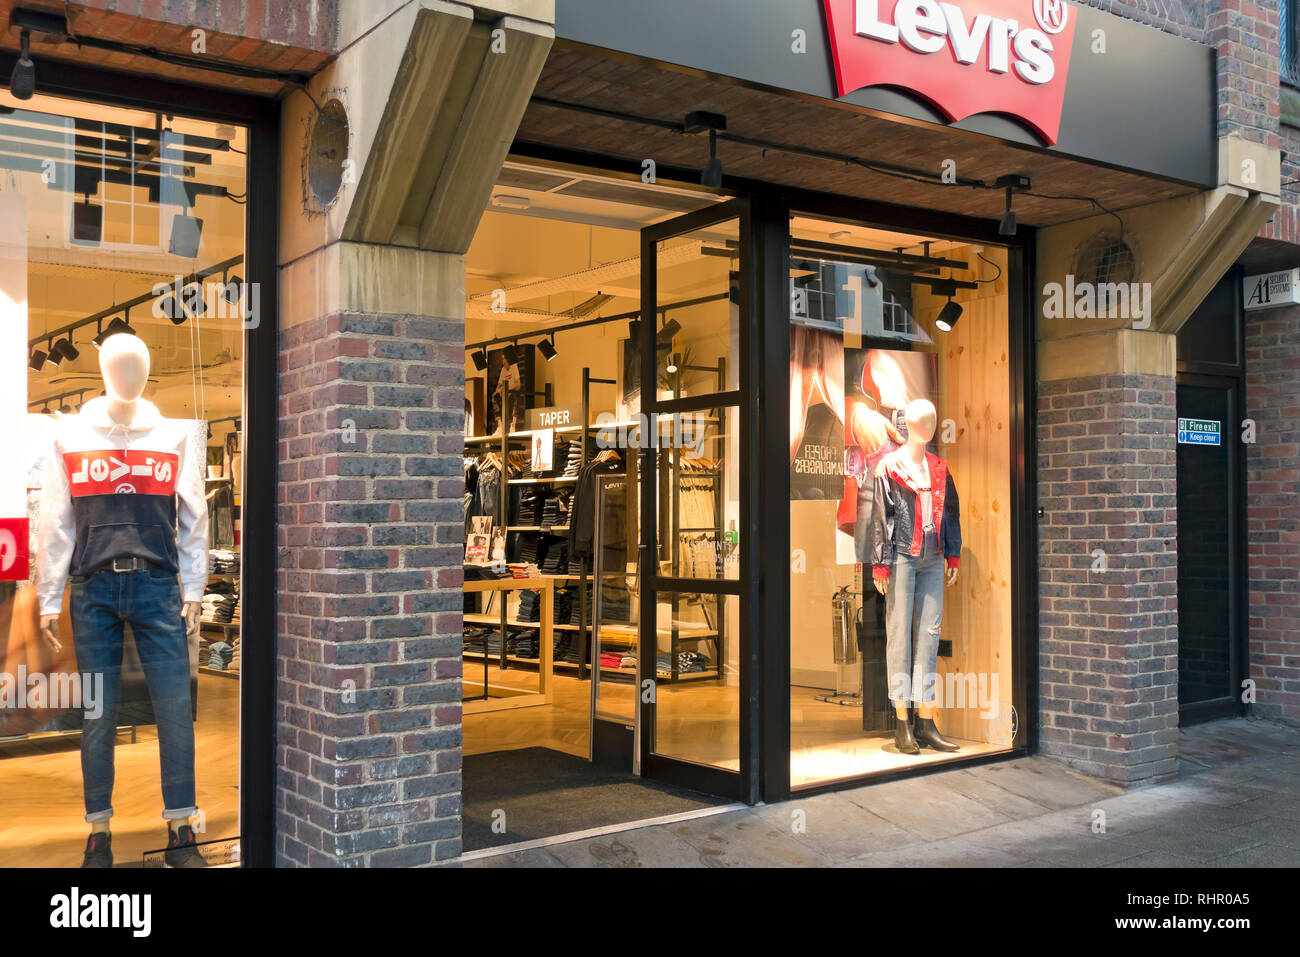 levis lodi outlet mall